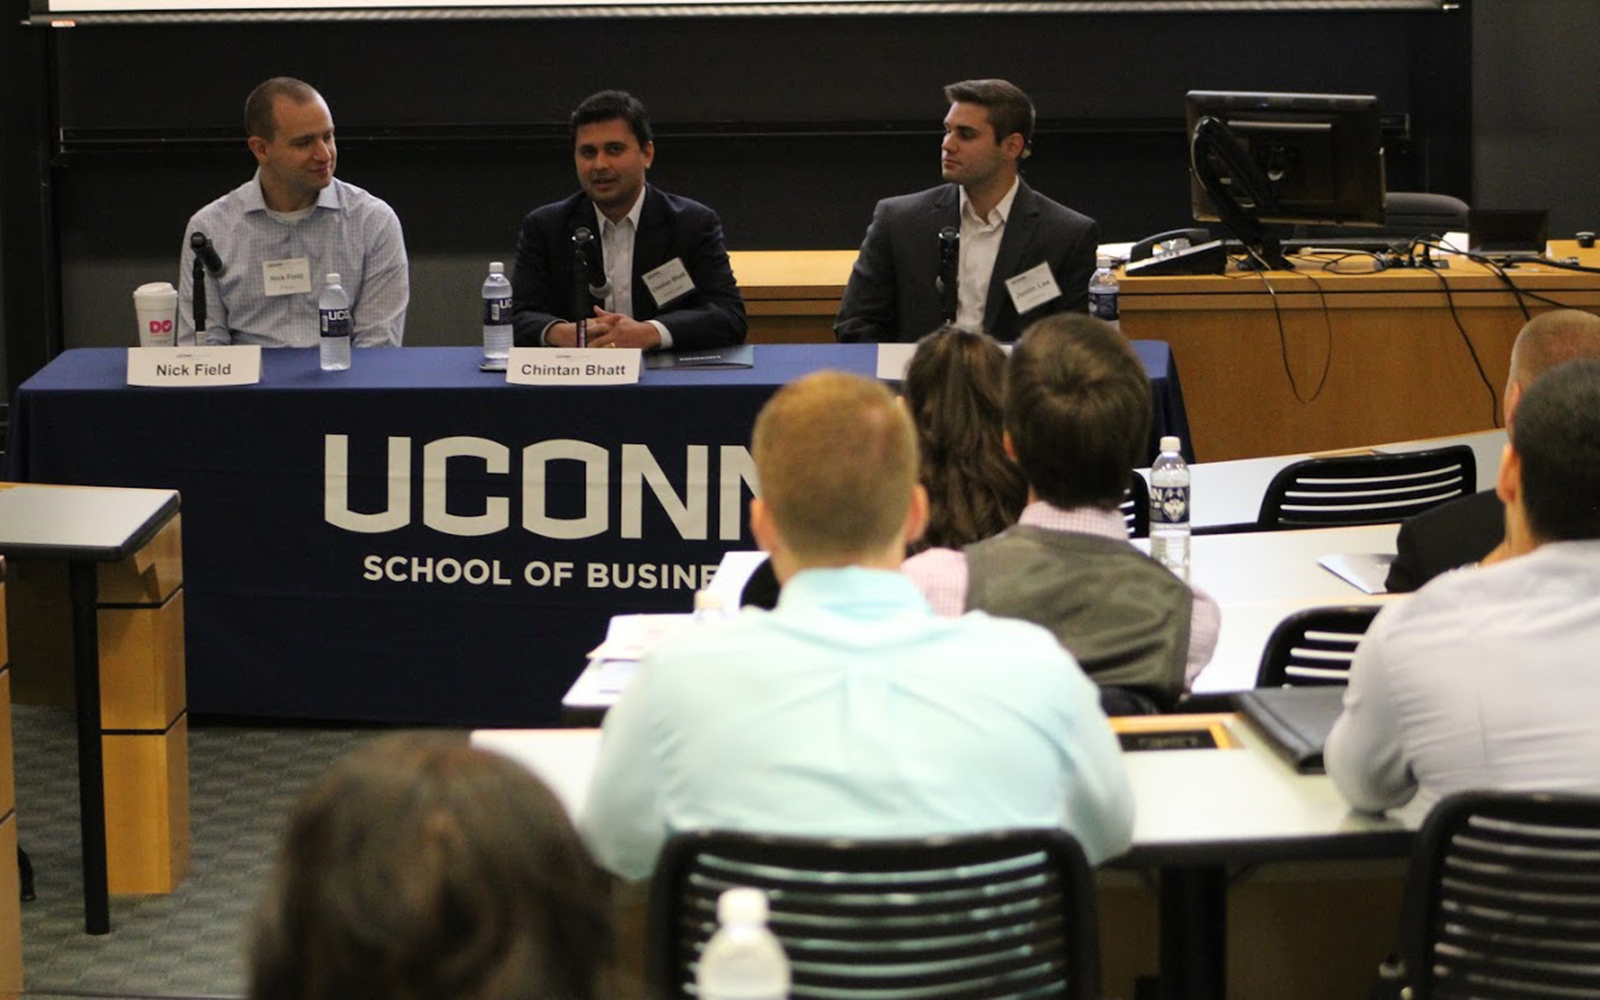 Careers in investments, asset management, banking and prestigious Wall Street opportunities were the focus of the inaugural Finance Conference at the School of Business. (Joshua Weist/UConn School of Business)